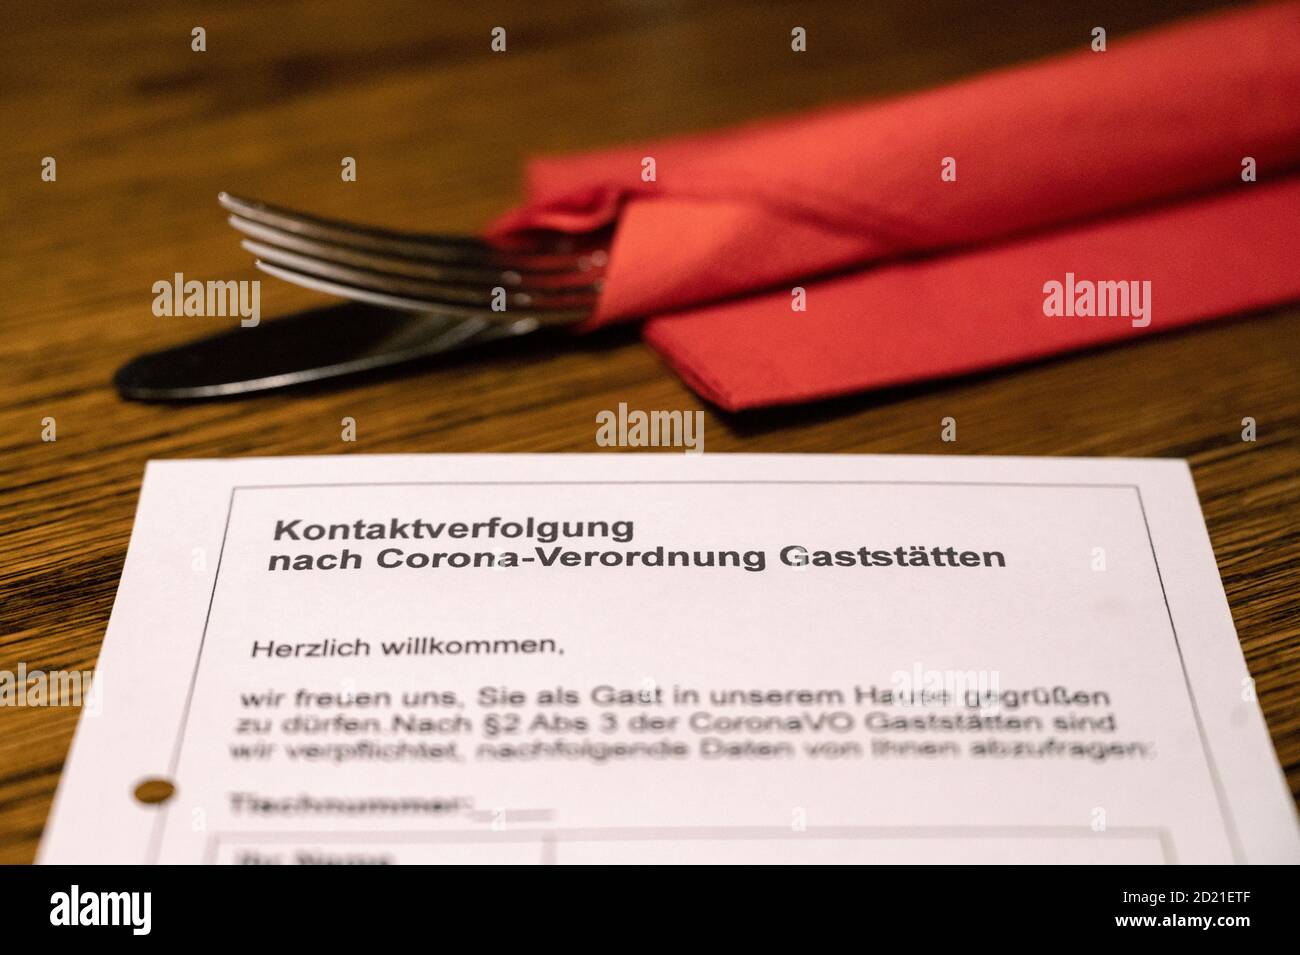 Stuttgart, Germany. 06th Oct, 2020. A sheet for contact tracing in restaurants according to the Corona Regulation is placed on a table in a restaurant. At a press conference, Baden-Württemberg's Minister of Health Lucha emphasised the importance of tracing infection chains. Therefore, he said, the proper completion of the tracing slips is also being increasingly controlled in restaurants and pubs. (to dpa 'Baden-Wuerttemberg raises alarm - tightened corona controls') Credit: Marijan Murat/dpa/Alamy Live News Stock Photo